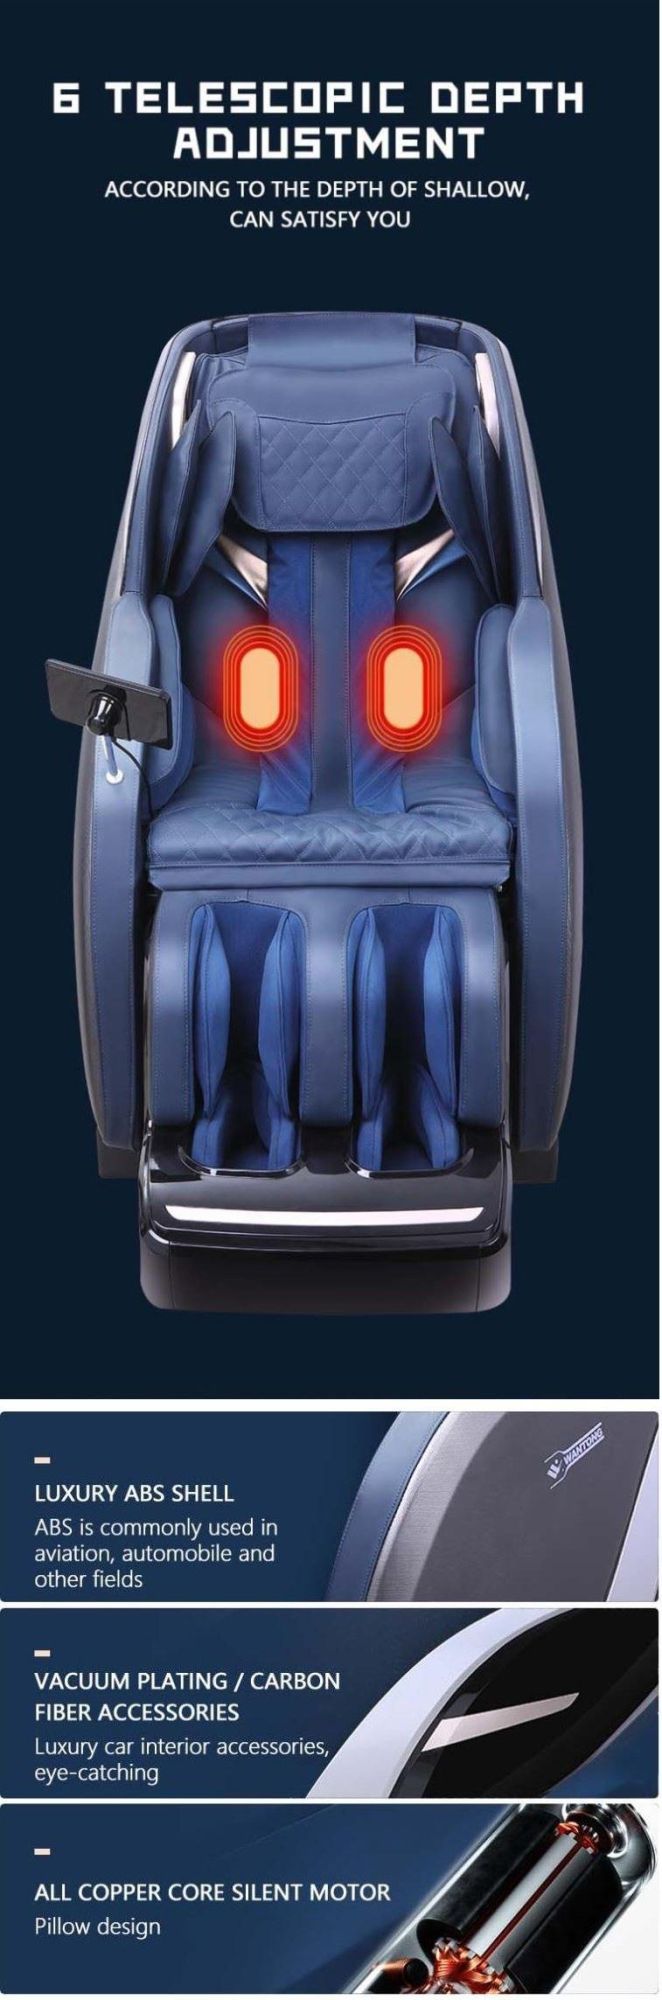 2021 Best Sell Massager 3D Electric Full Body Massage Chair with Neck Massager